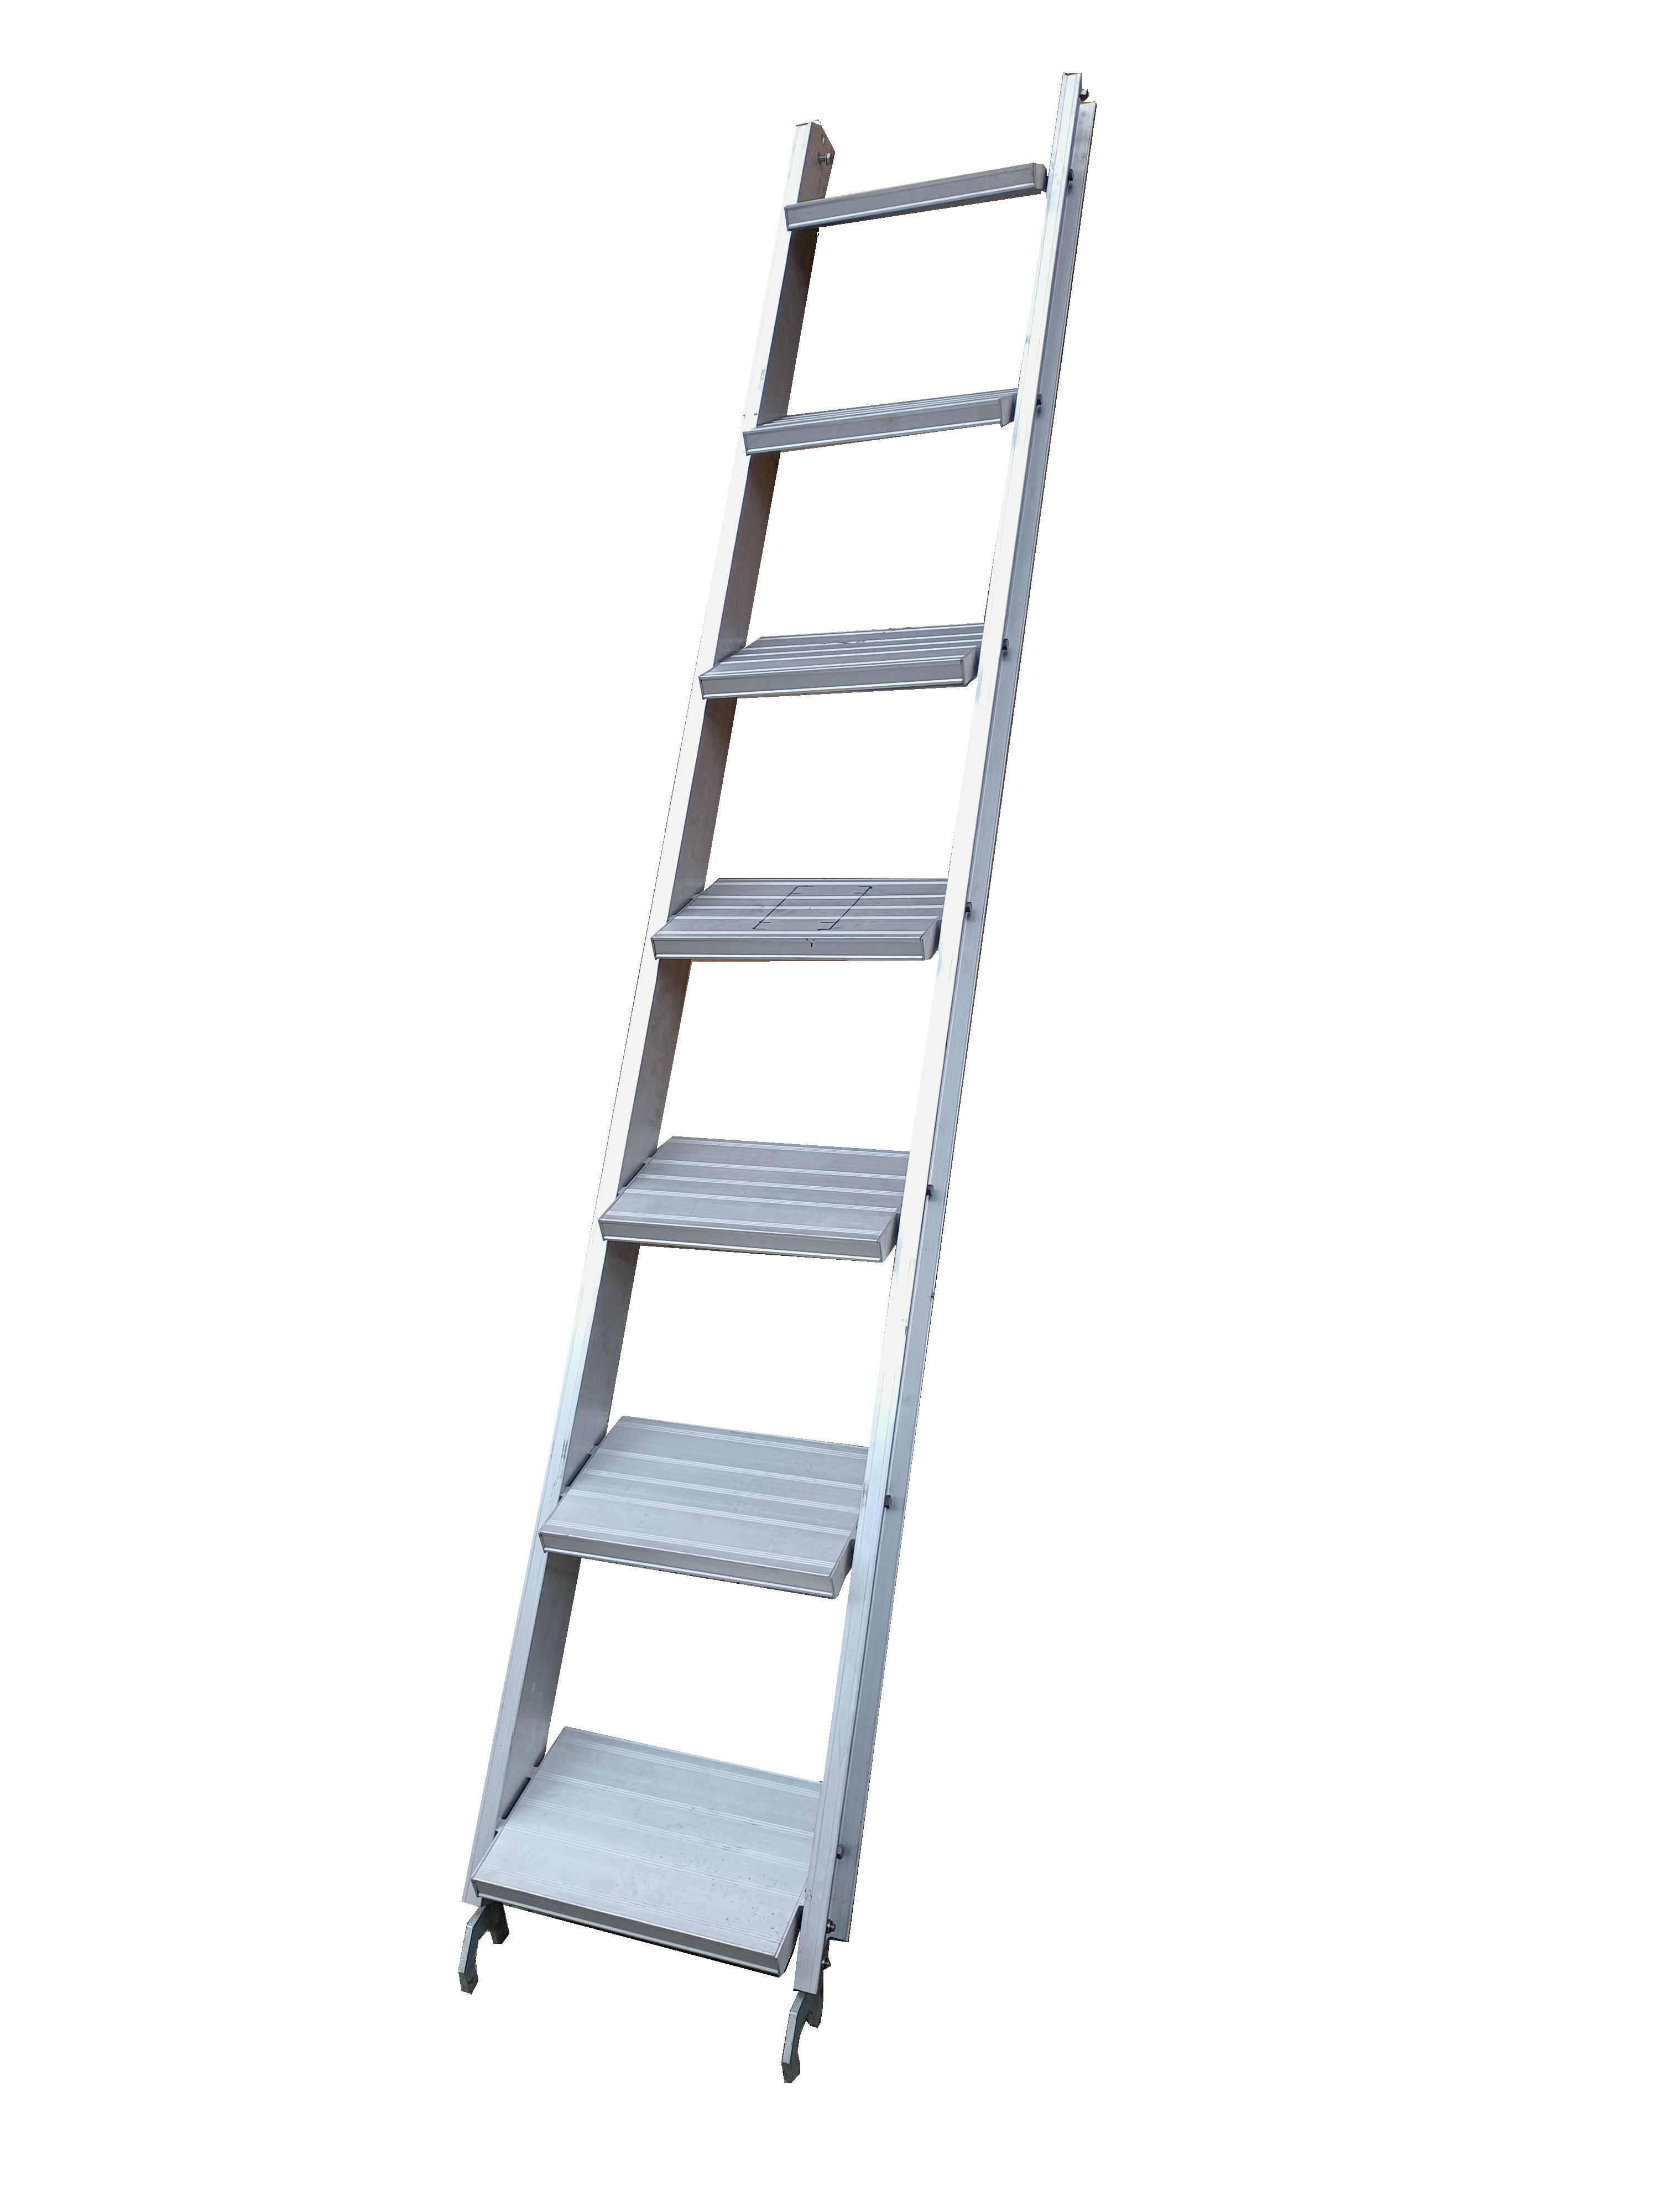 Inclined ladder